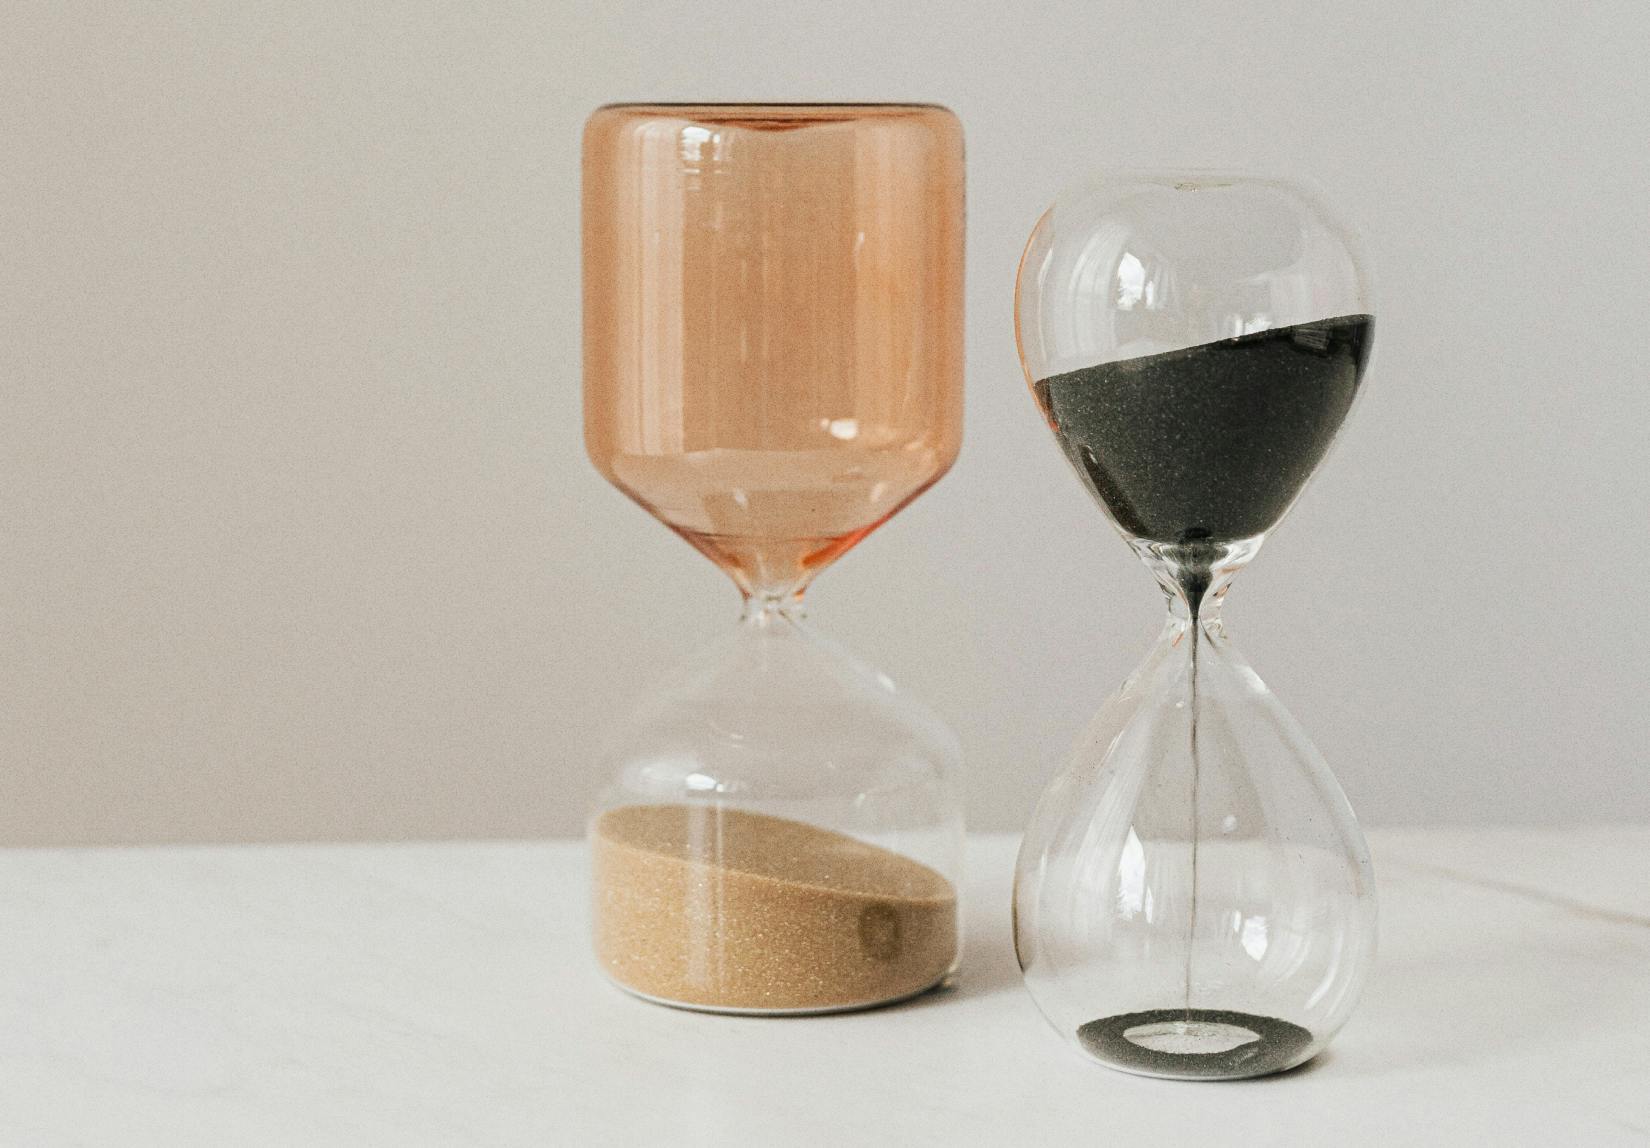 Set of Modern Hourglasses on Table